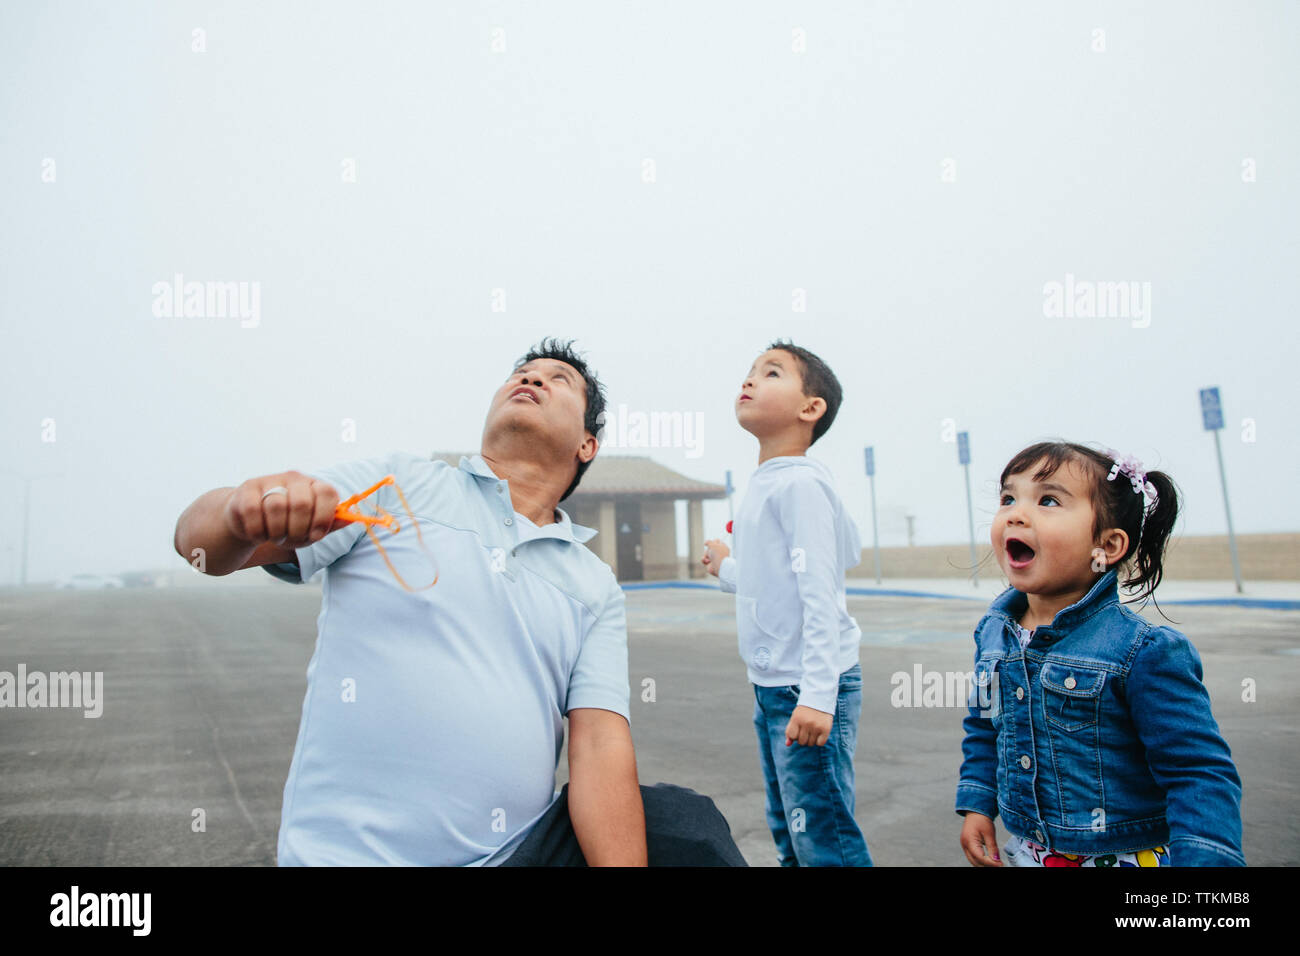 Father Holding Slingshot with Daughter And Son Daughter In Awe Stock Photo